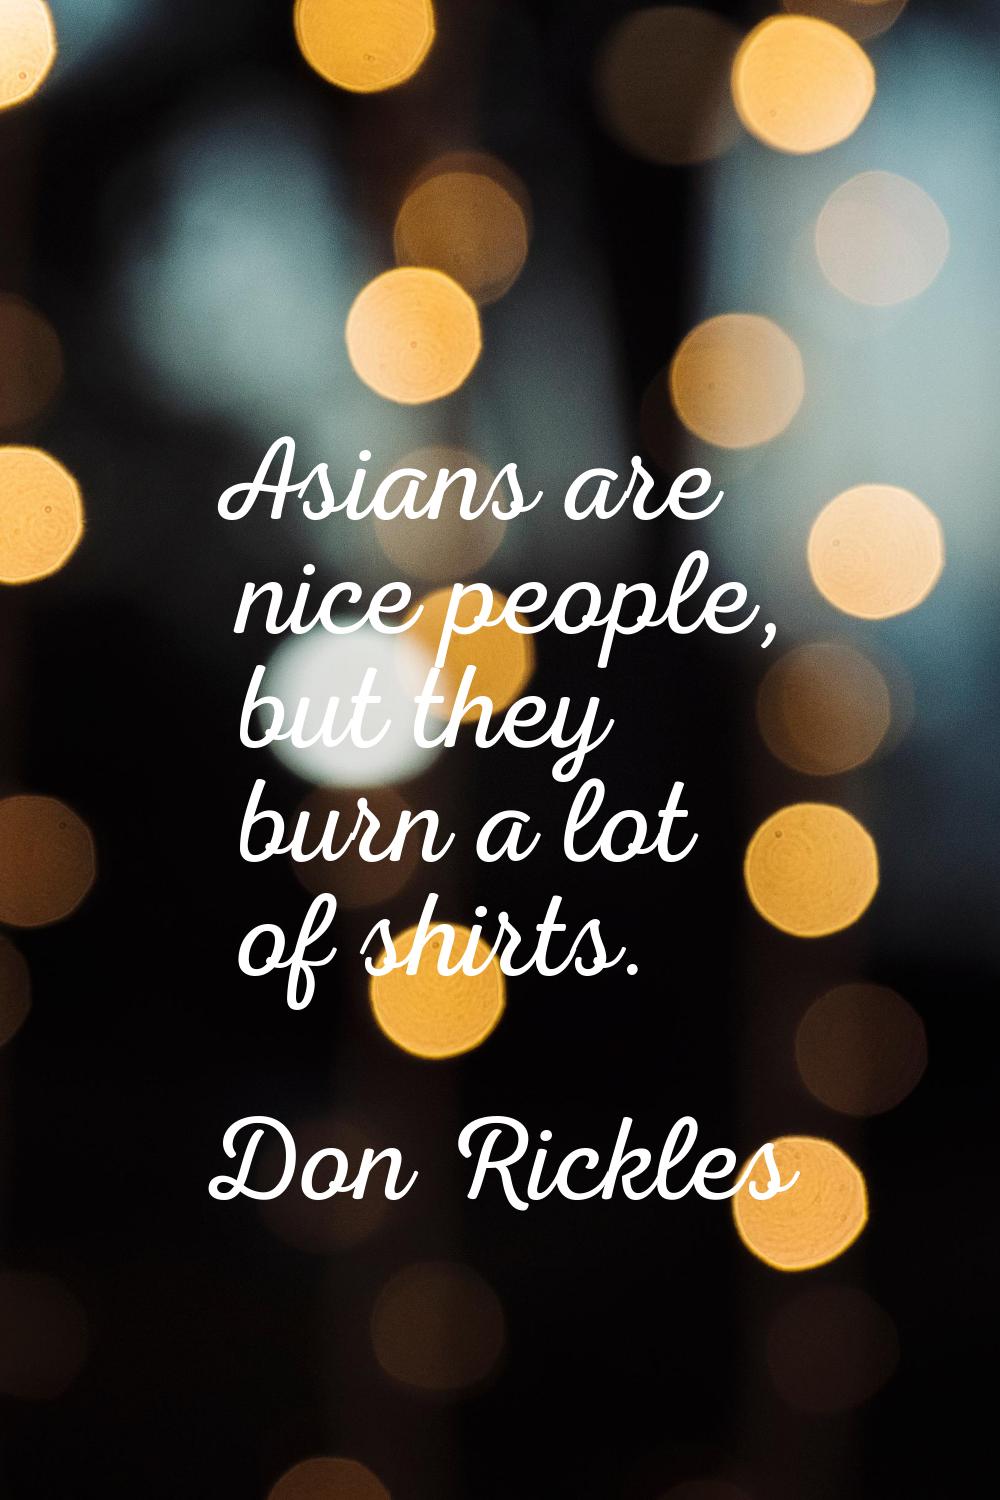 Asians are nice people, but they burn a lot of shirts.